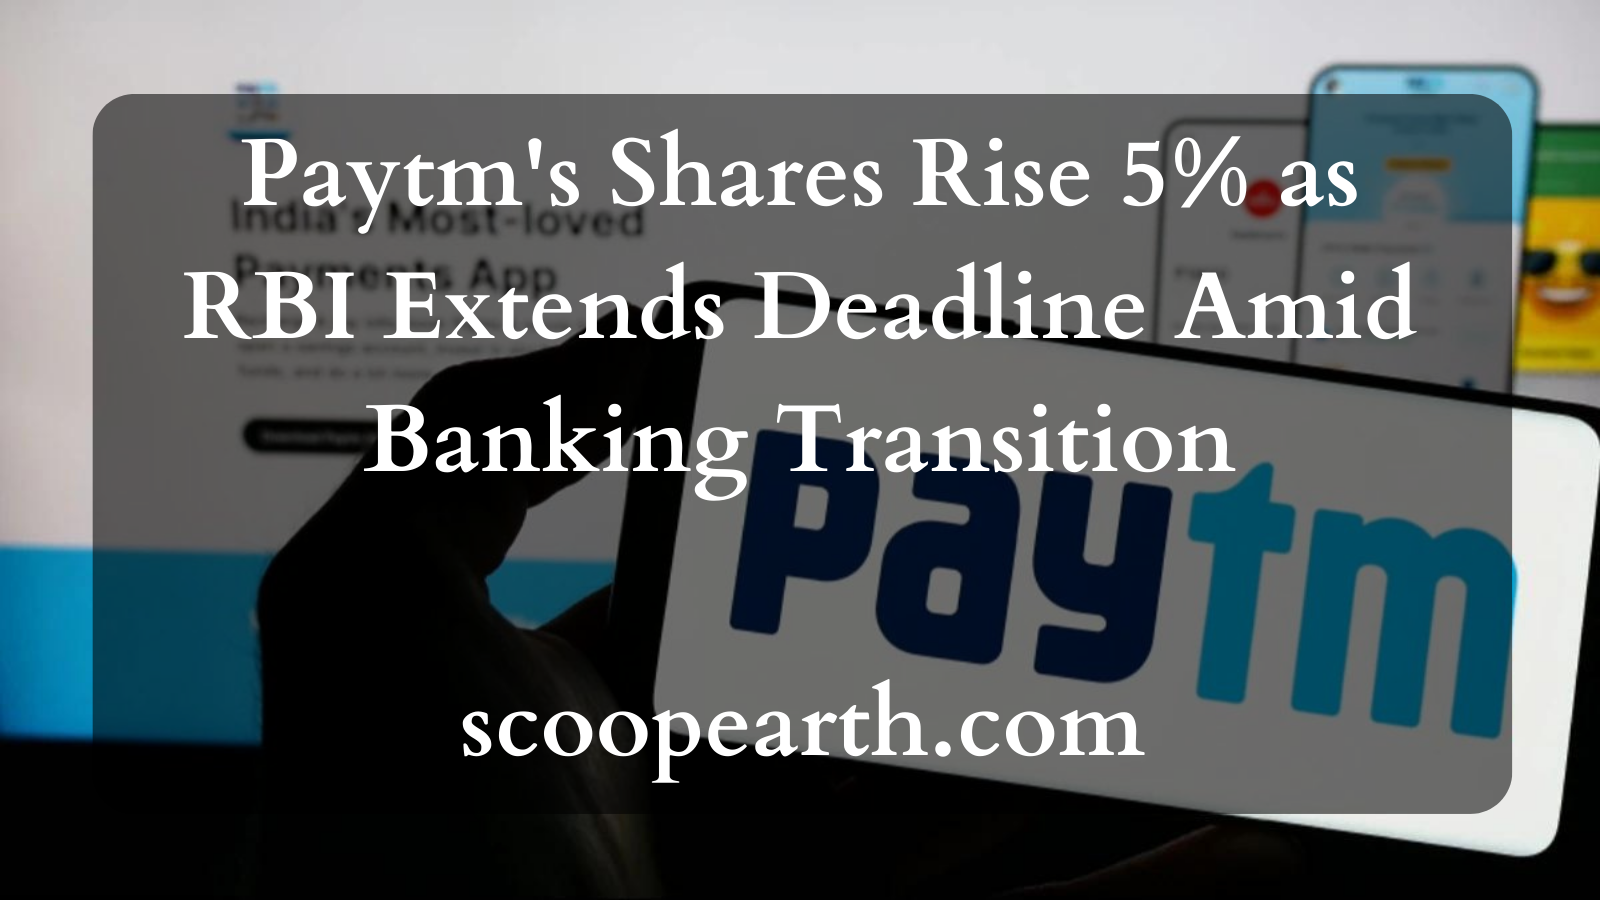 Paytm's Shares Rise 5% as RBI Extends Deadline Amid Banking Transition